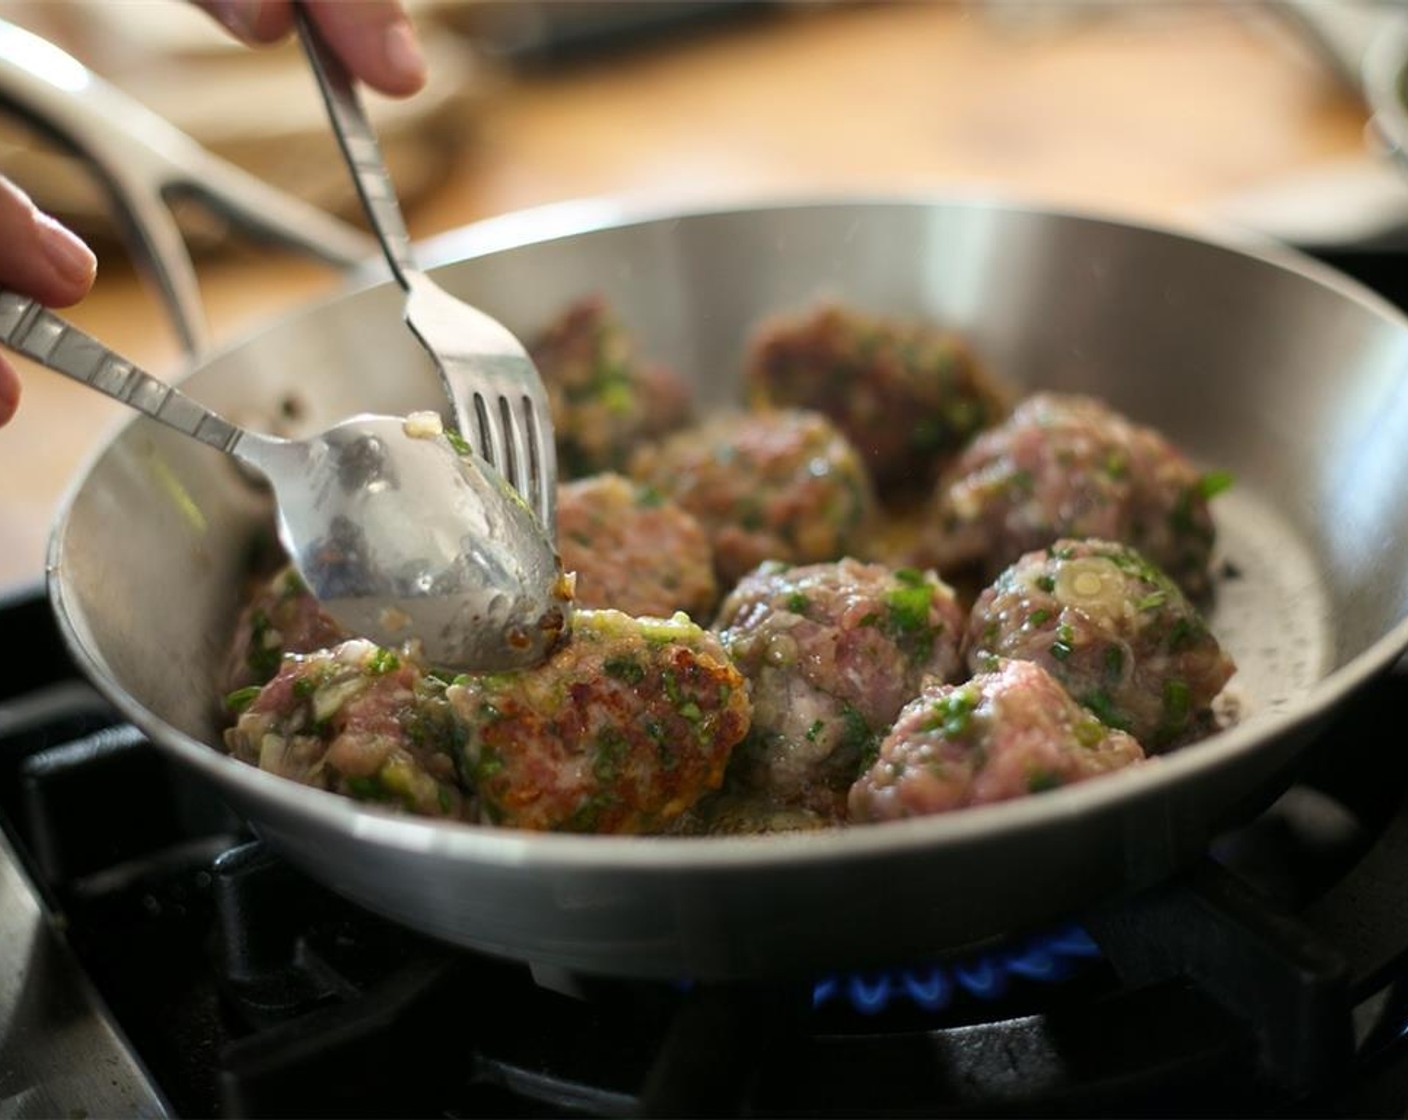 step 12 Heat a medium saute pan with an oven proof handle over medium high heat. Add one tablespoon of oil and sear the meatballs on two sides for three minutes each side. Be sure not to burn them.